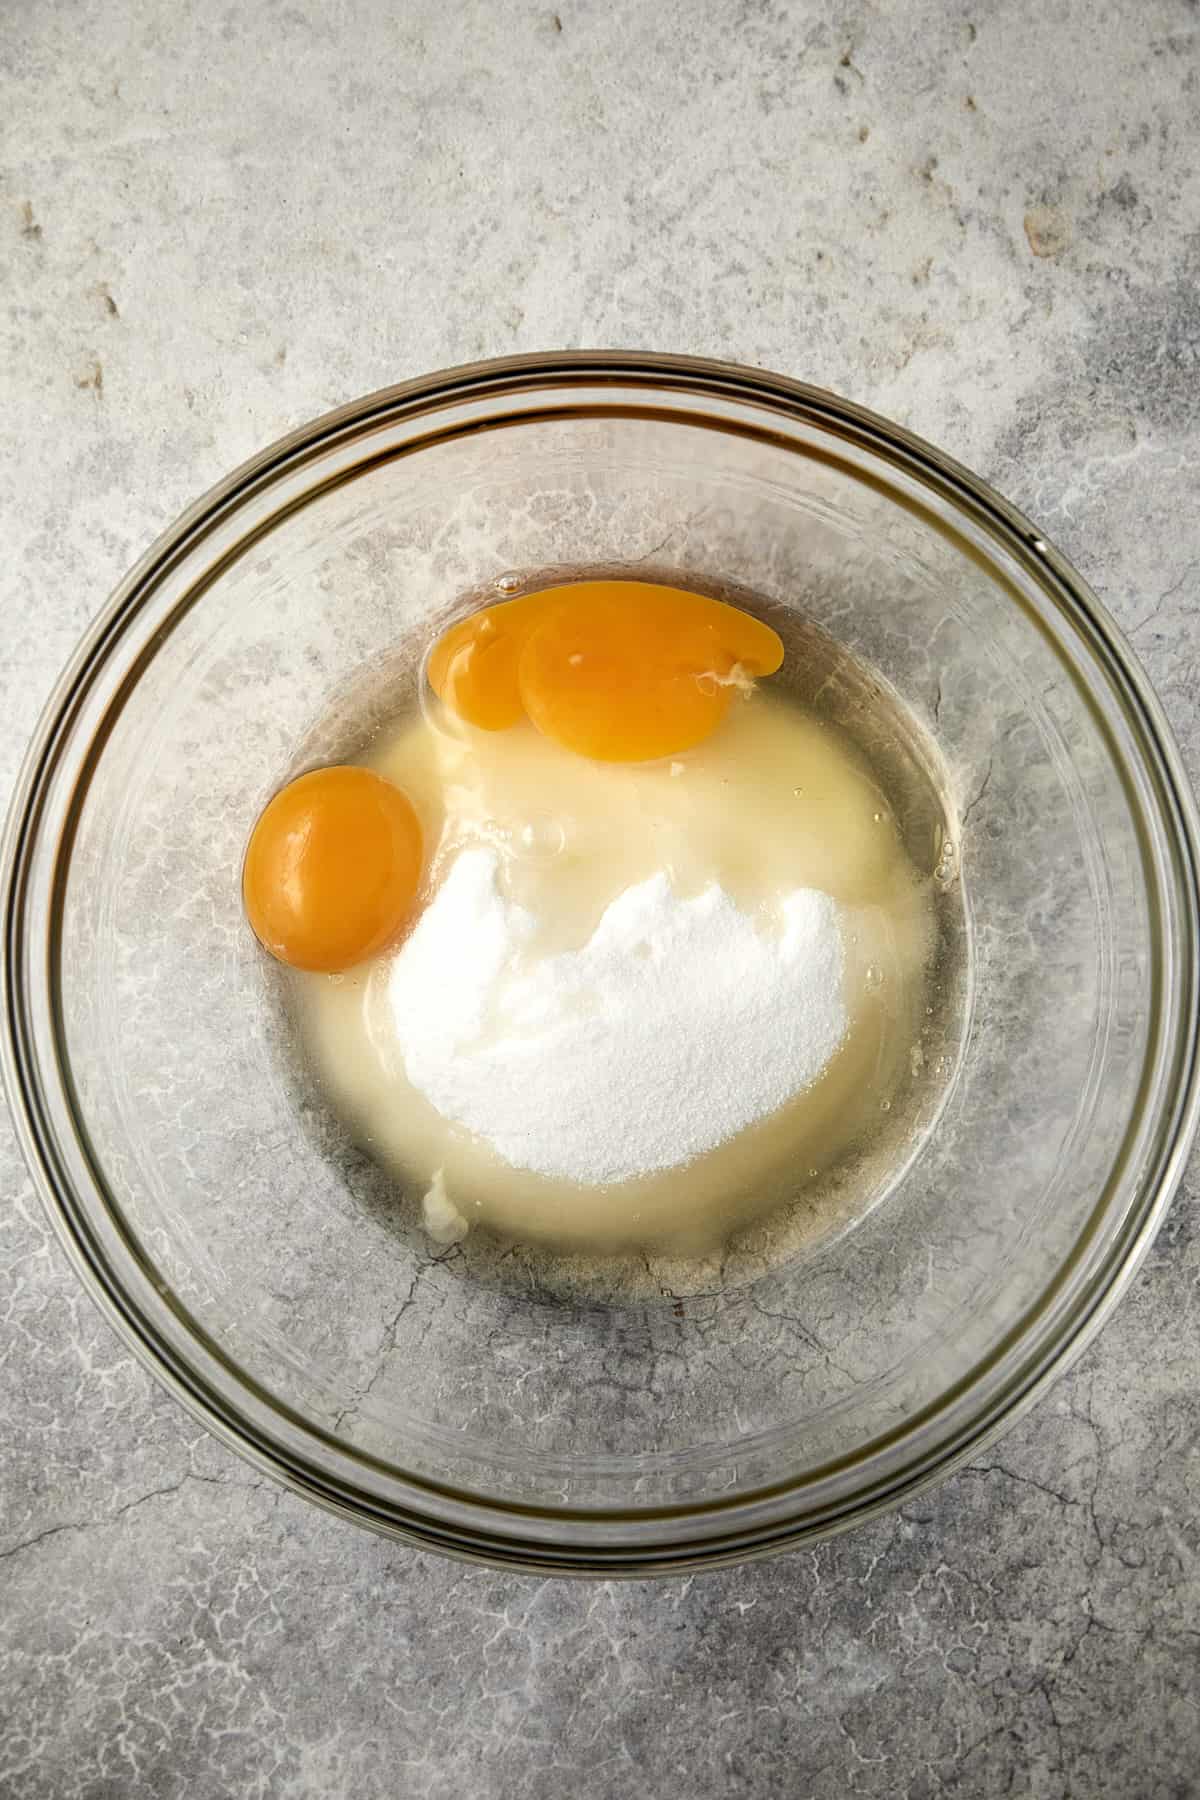 The image shows a clear glass bowl on a gray surface with two whole eggs and a pile of granulated sugar inside it. The ingredients are unblended.